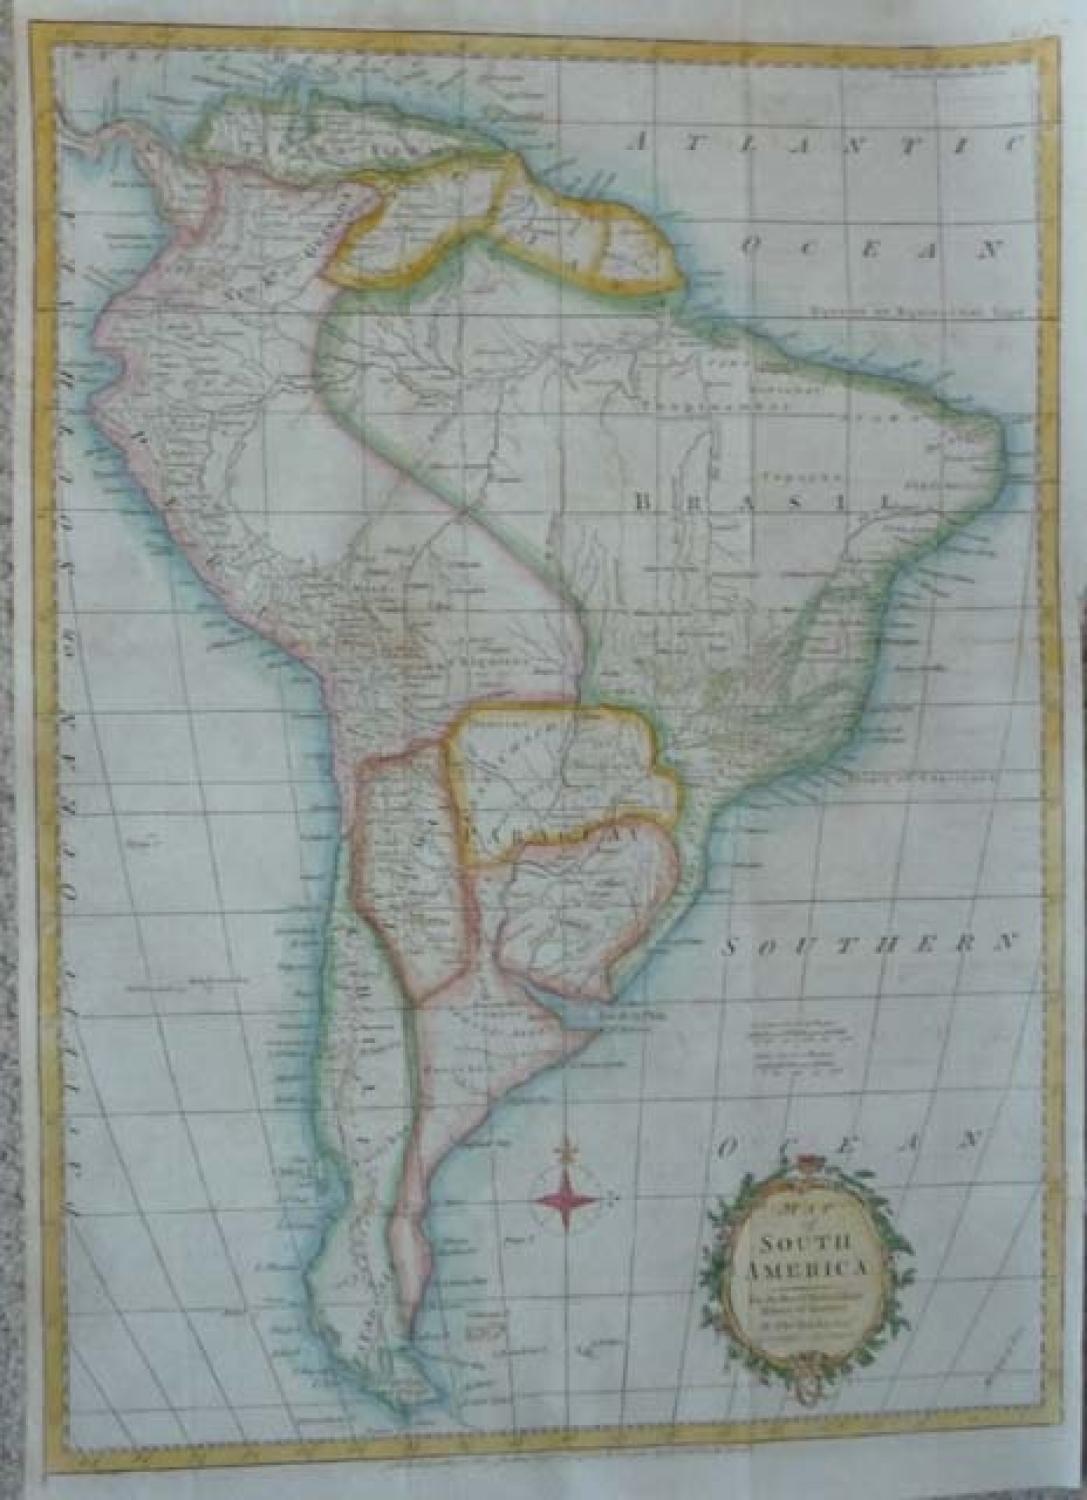 Kitchin - A Map Of South America